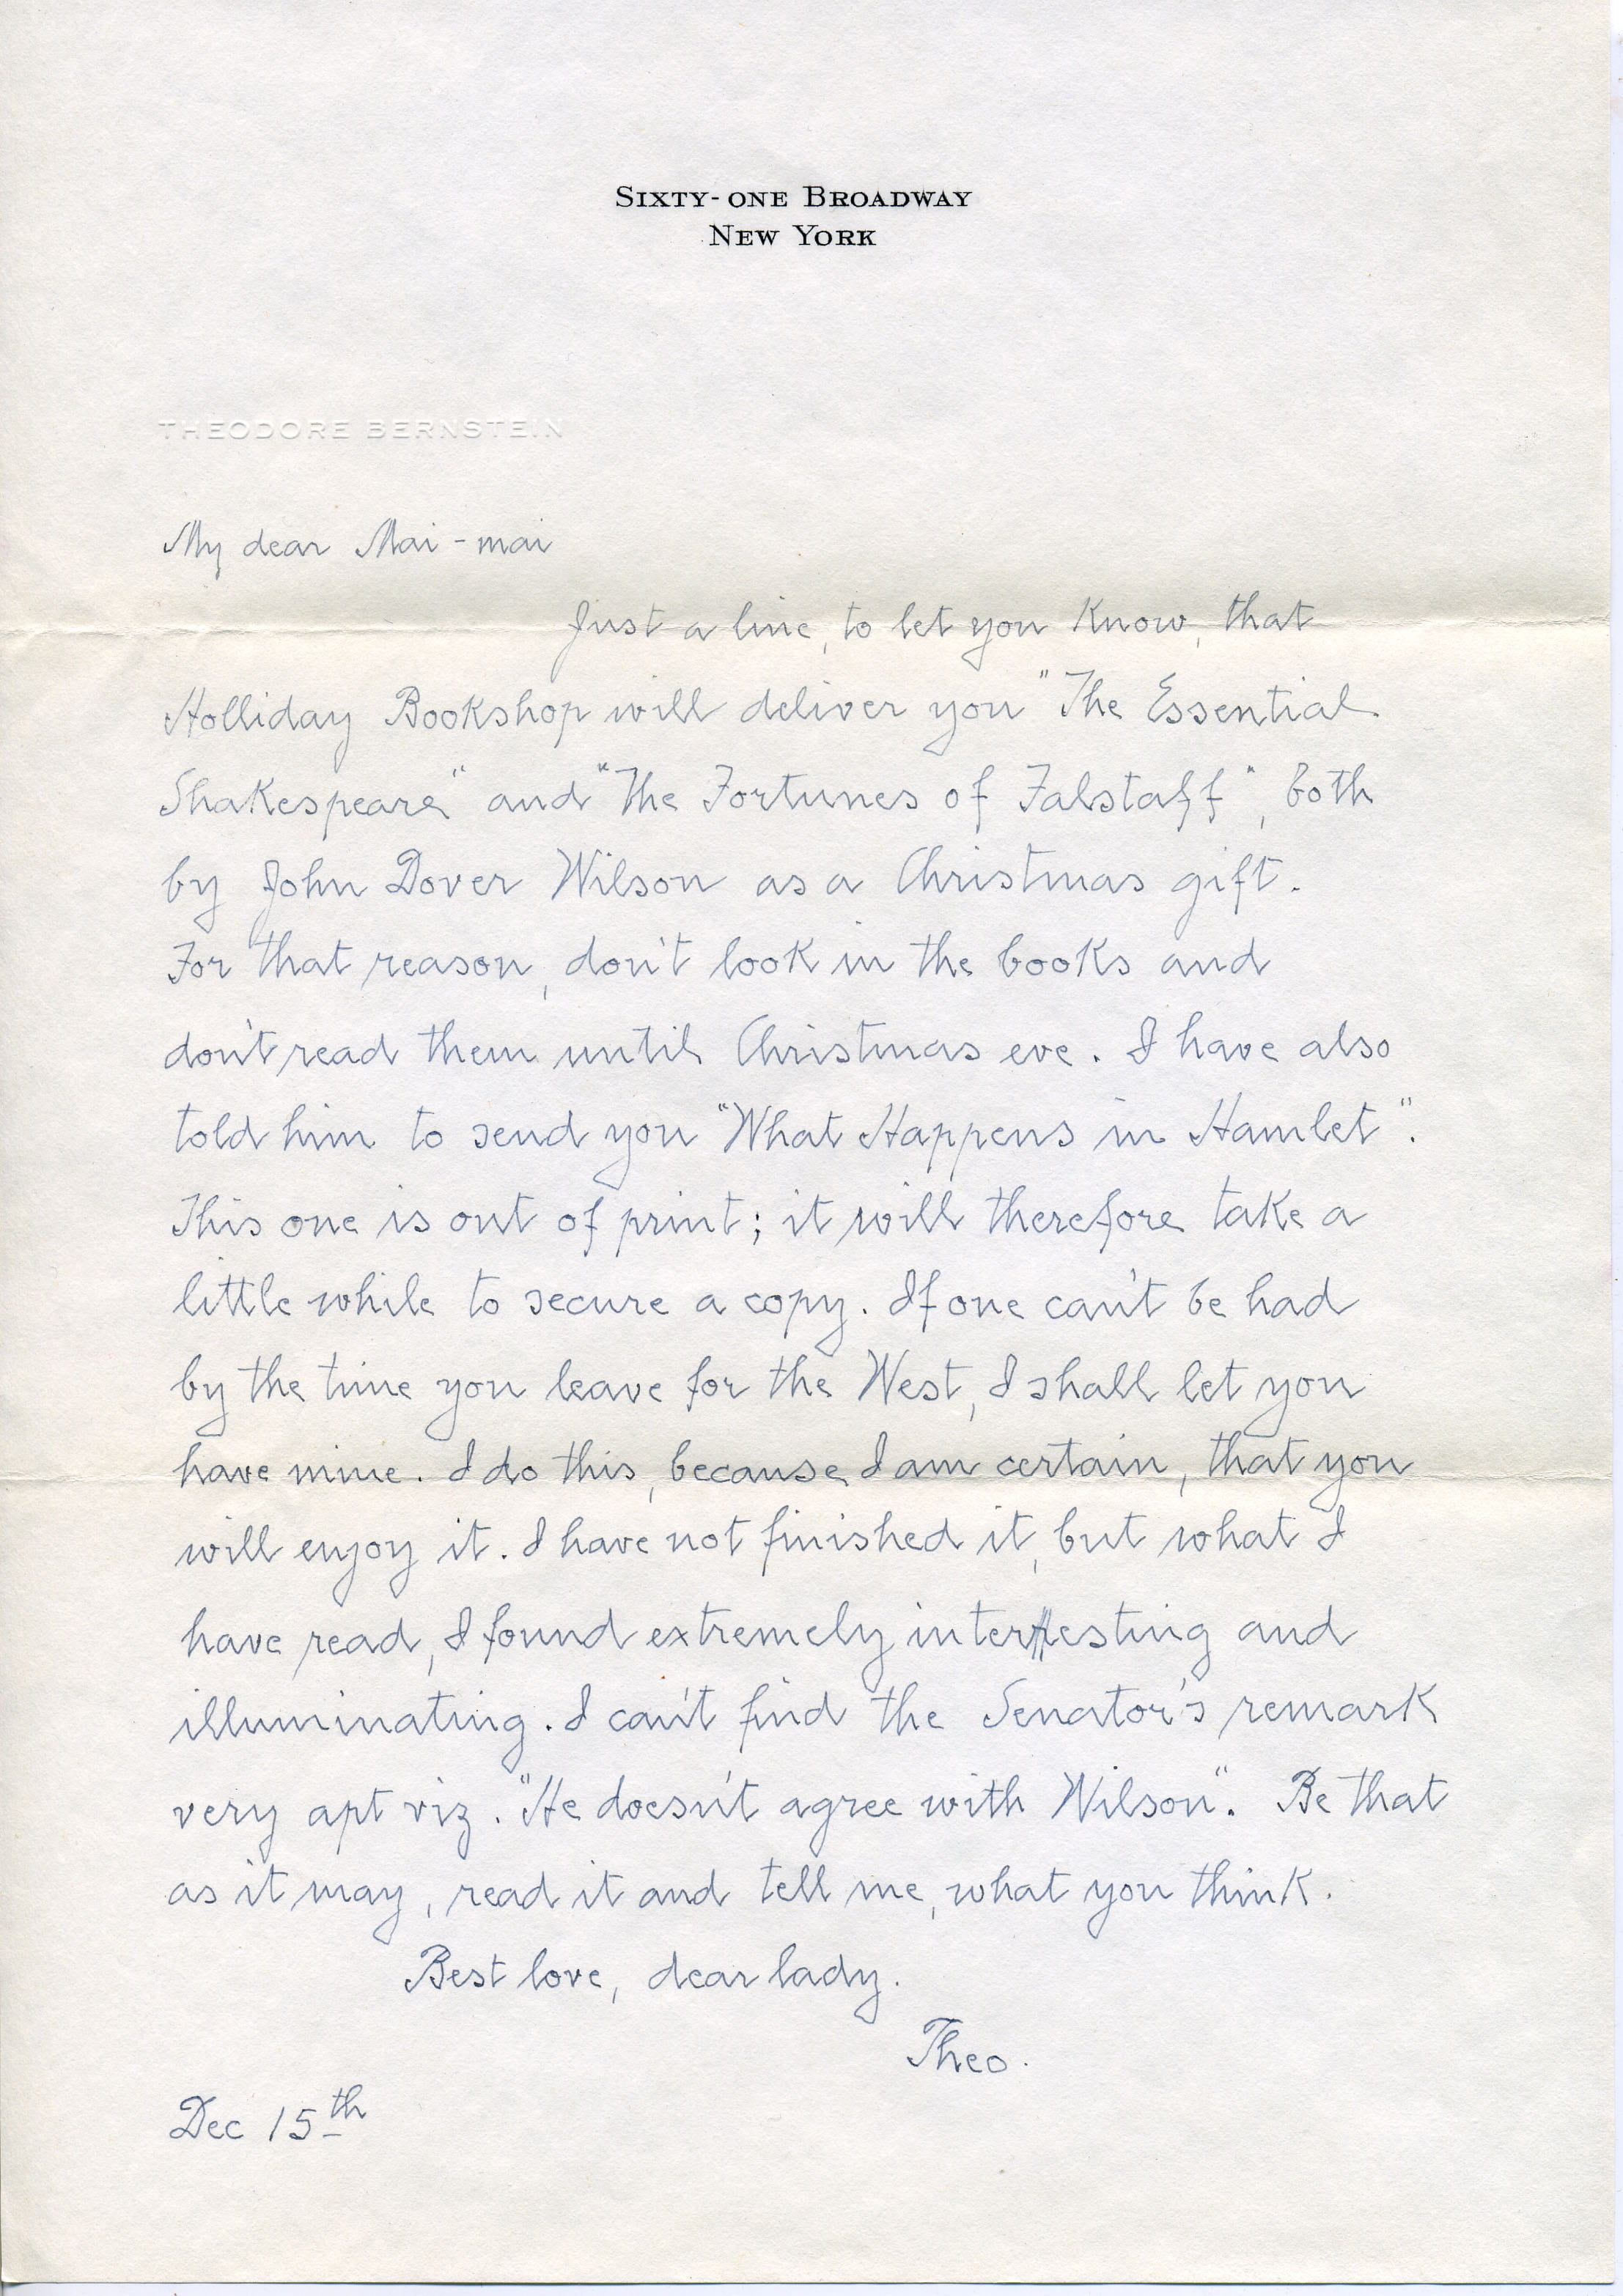 Theodore Bernstein to Mai-mai Sze, 15 Dec. 1944?  Sharaff/Sze Collection File, Institutional Archives, New York Society Library (click for larger view)